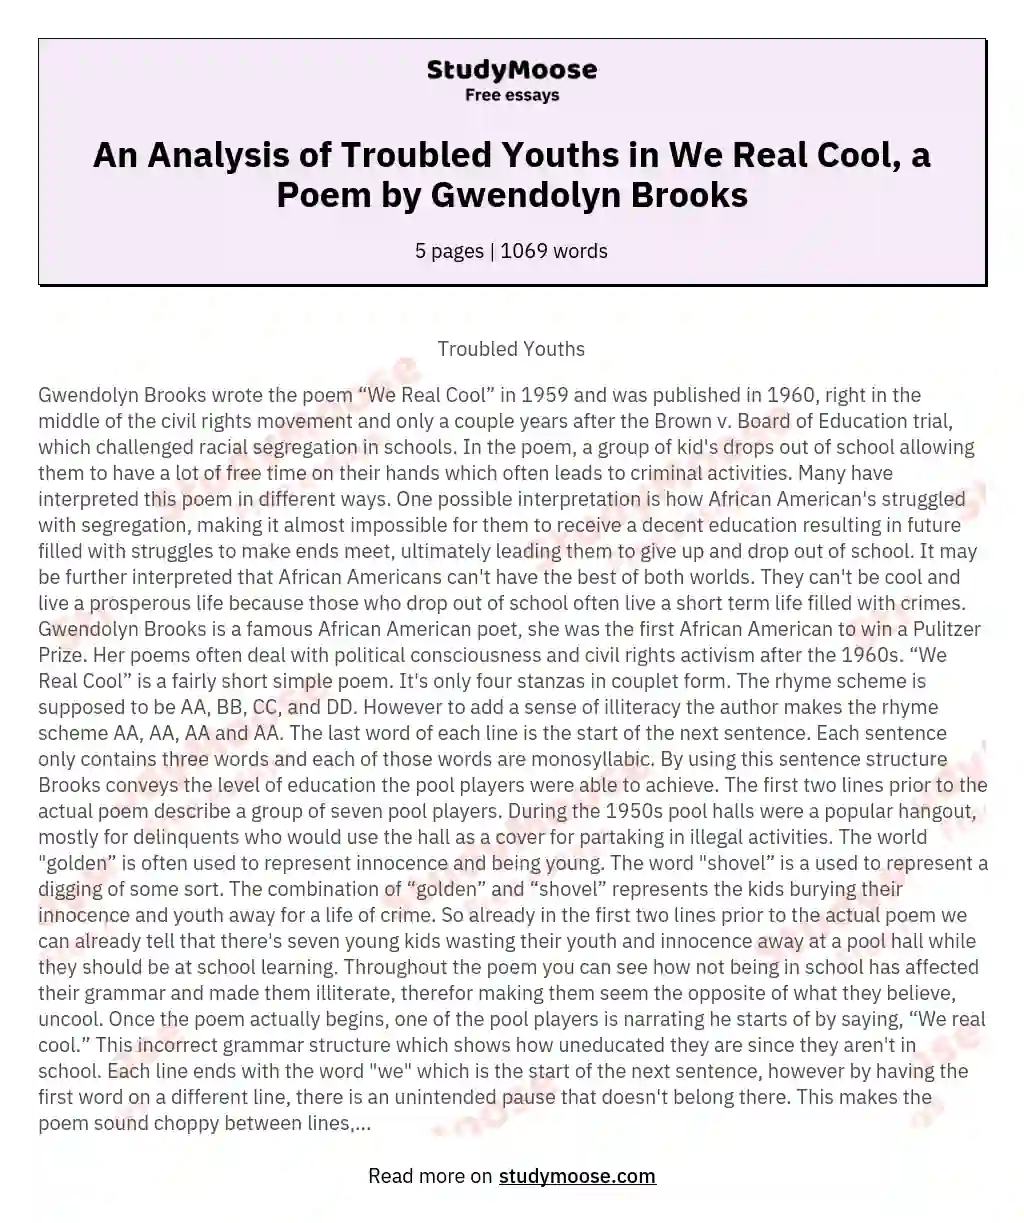 An Analysis of Troubled Youths in We Real Cool, a Poem by Gwendolyn Brooks essay